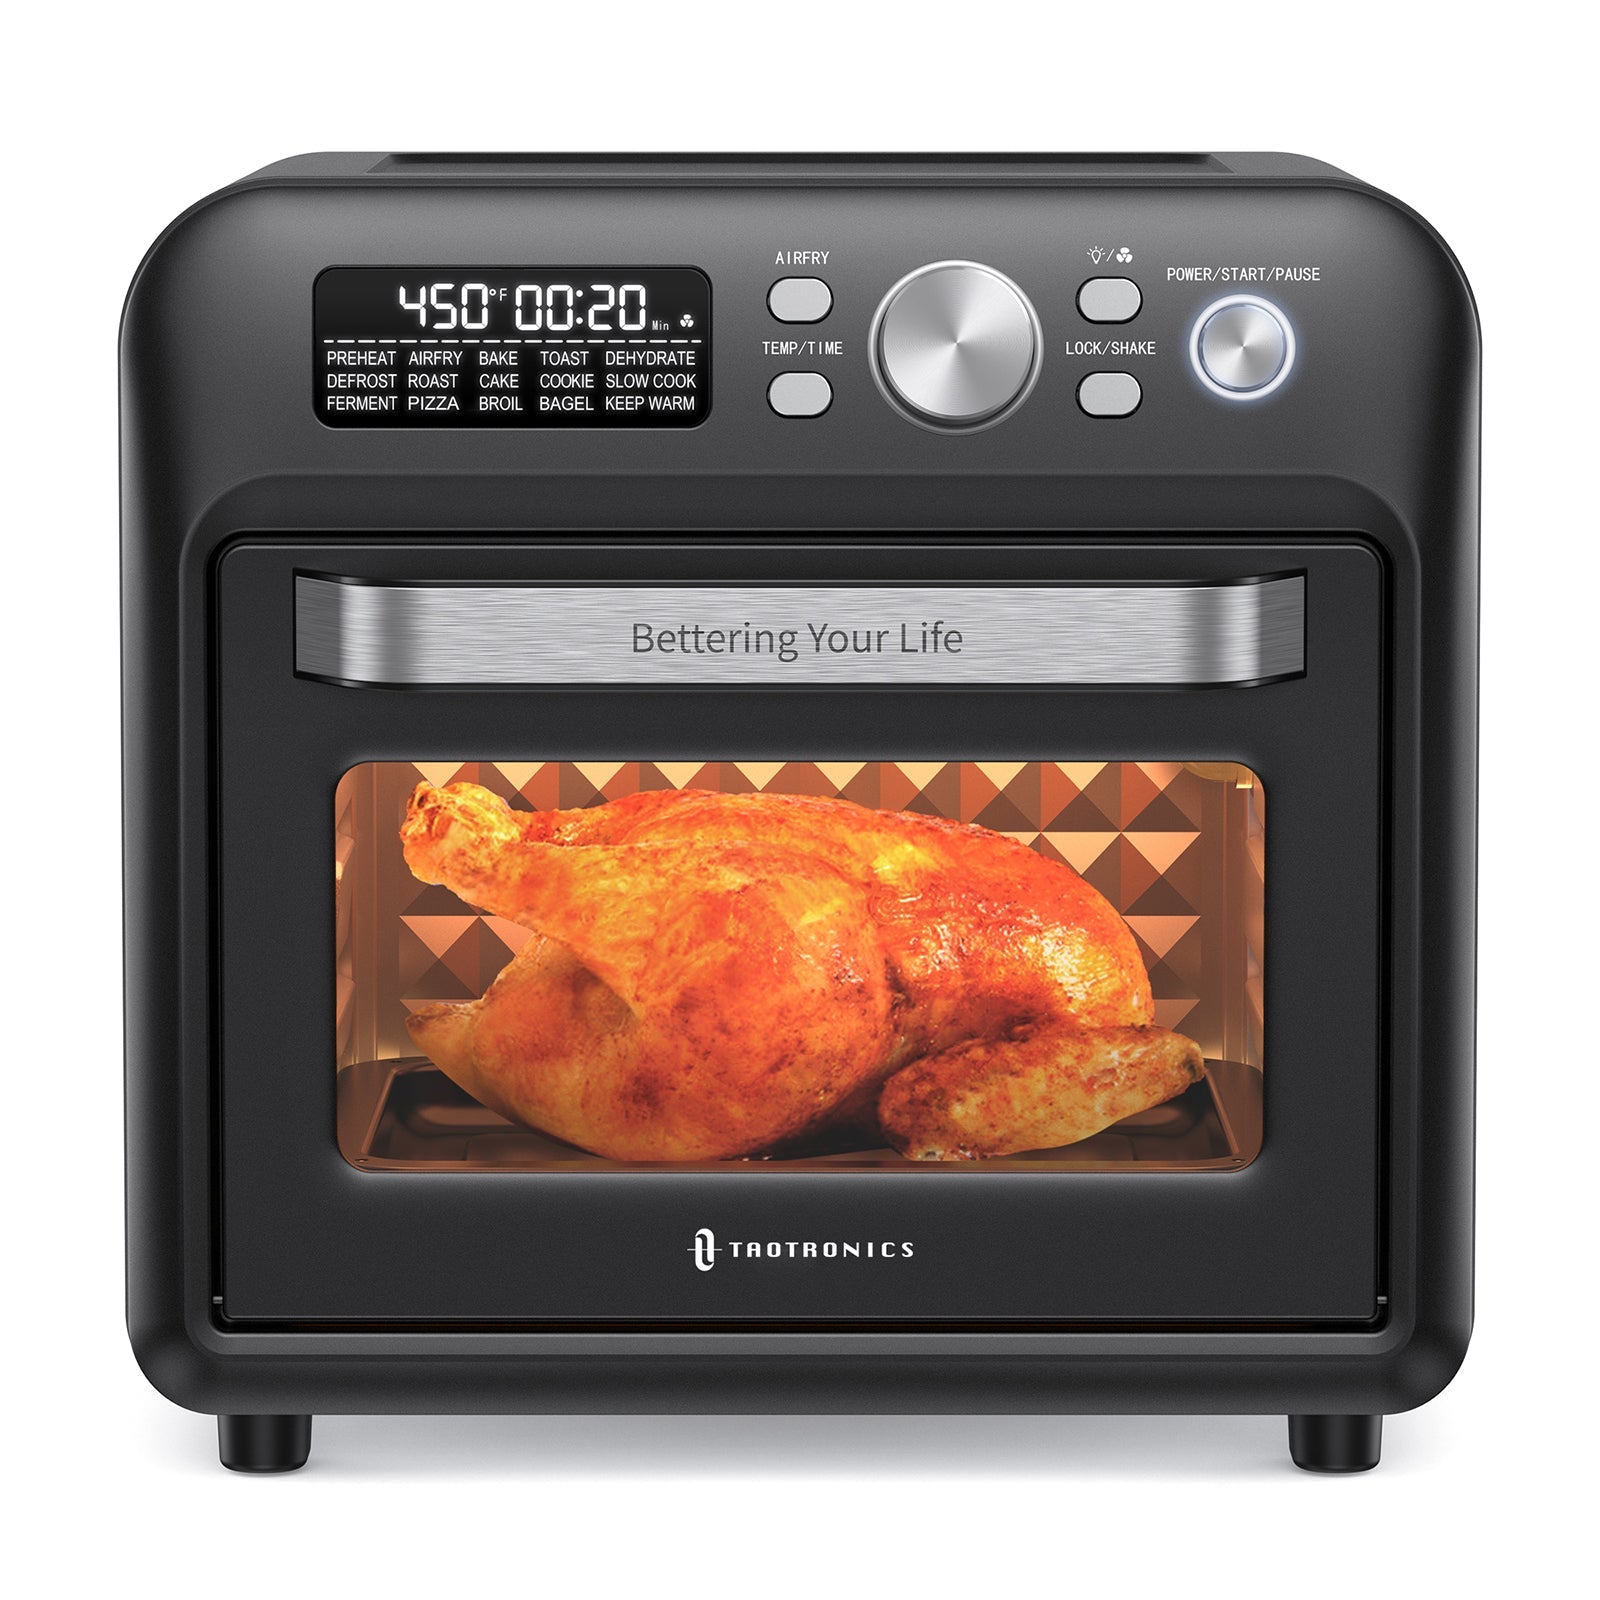 19QT Countertop Convection Toaster Oven Air Fryer Combo Rotisserie Rack  Included